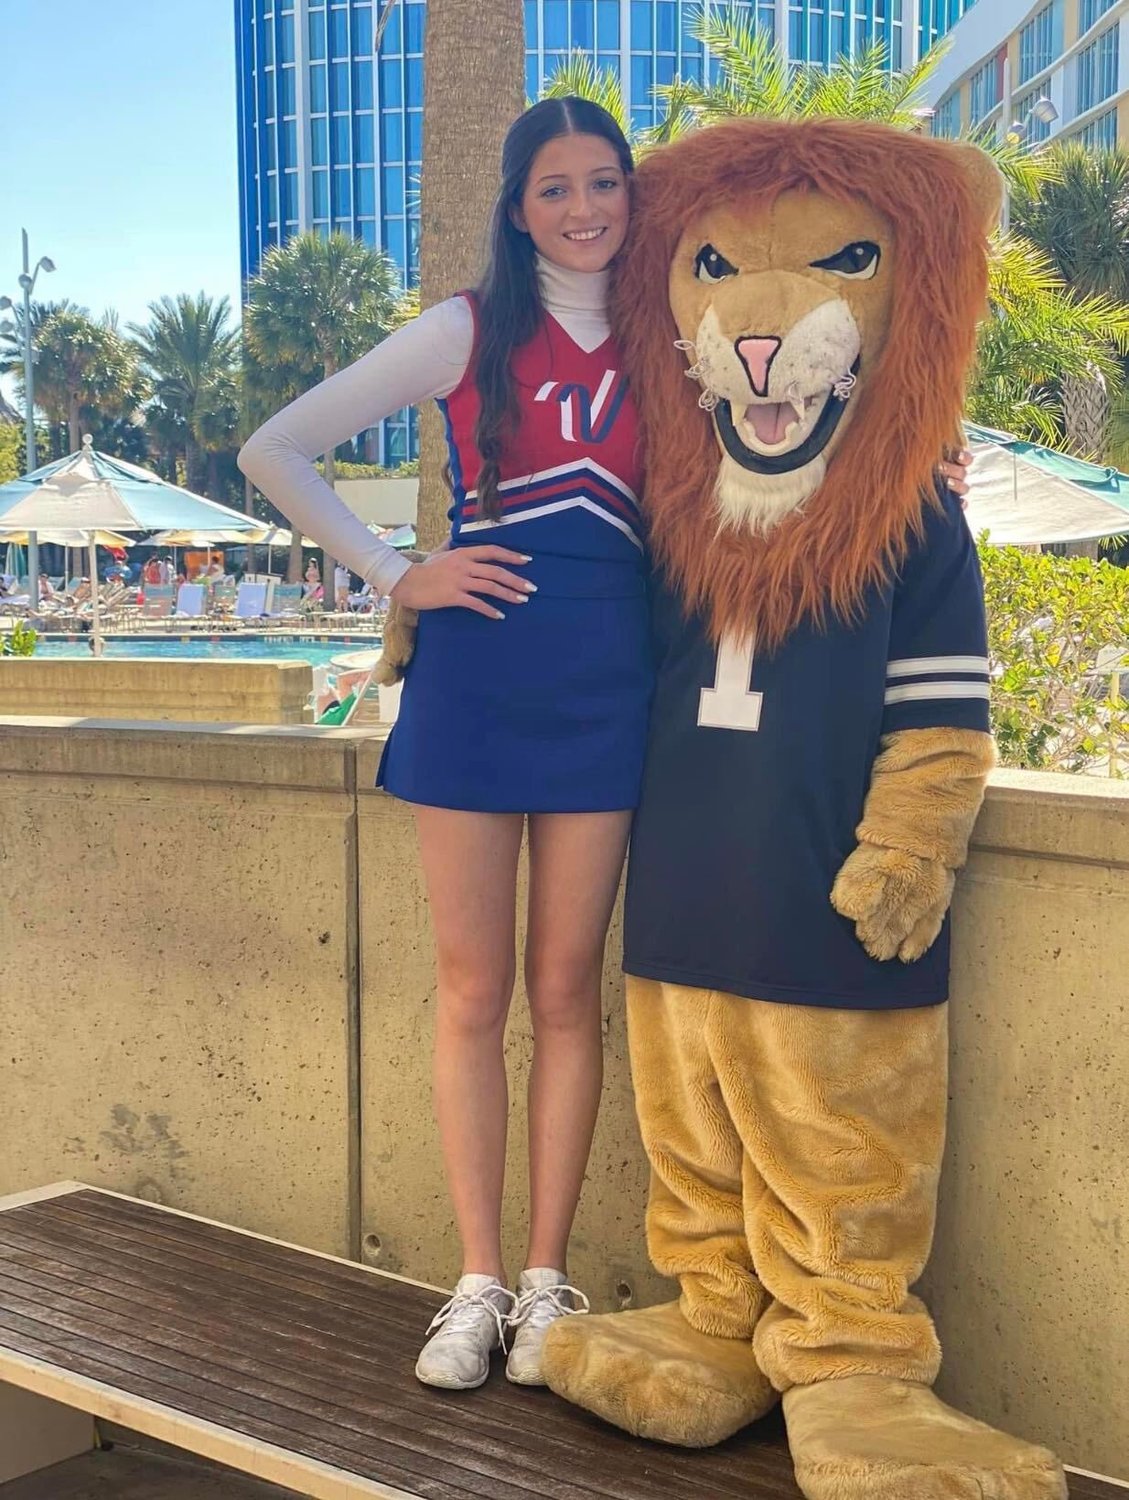 Fairhope’s Michelle Bossard and Foley’s Leo the Lion (Laylah Therrell) grew up childhood friends and both represented their high school squads in Orlando at the Jan. 2 Citrus Bowl at Camping World Stadium. The pair were All-American honorees by the Universal Cheerleading Association.